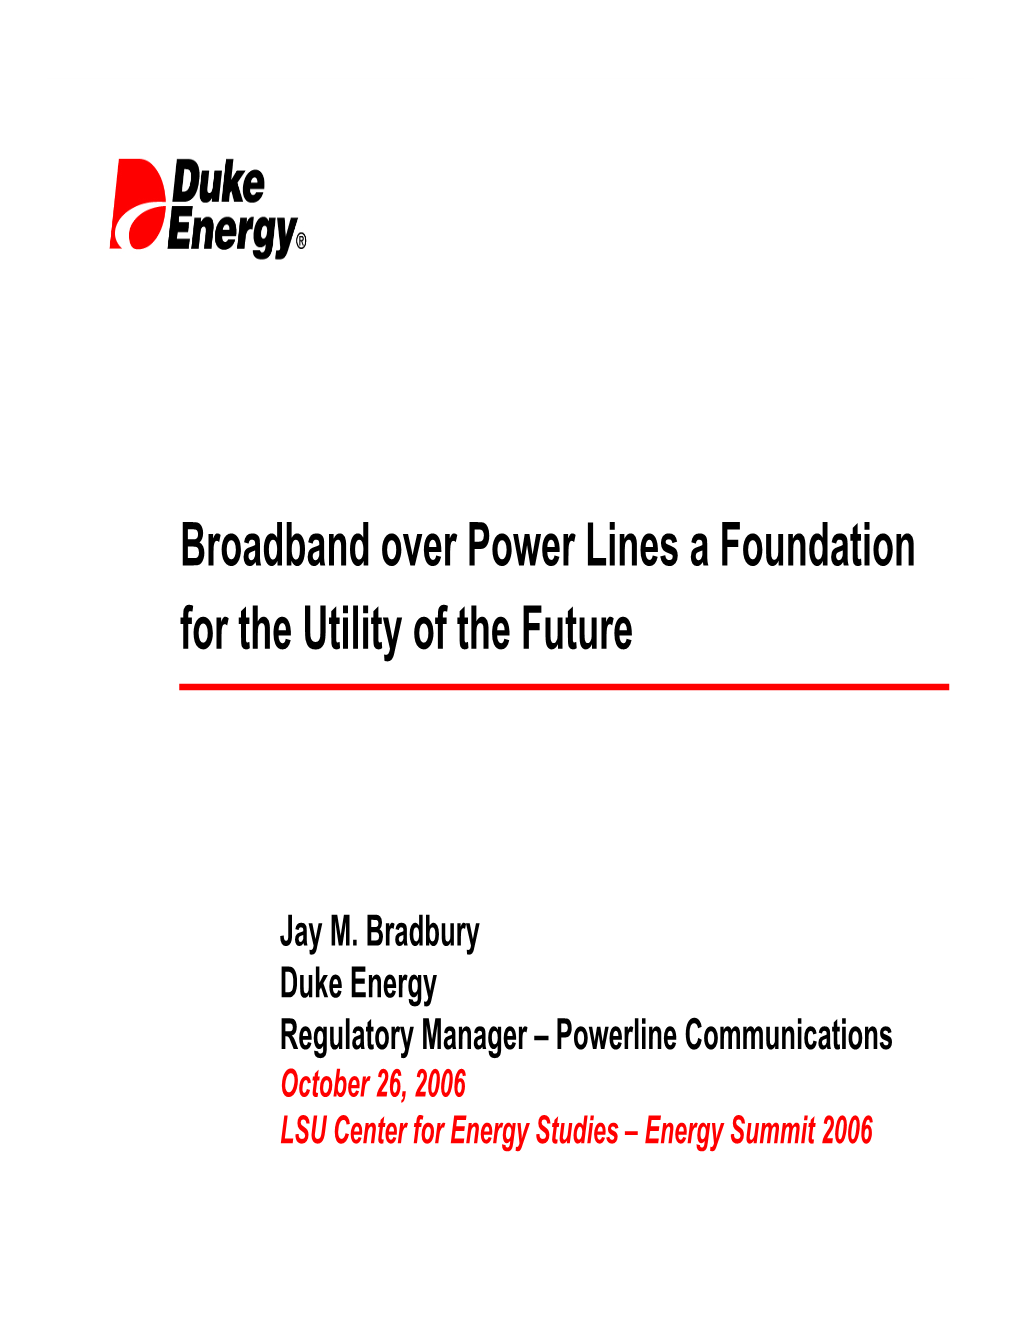 Broadband Over Power Lines a Foundation for the Utility of the Future